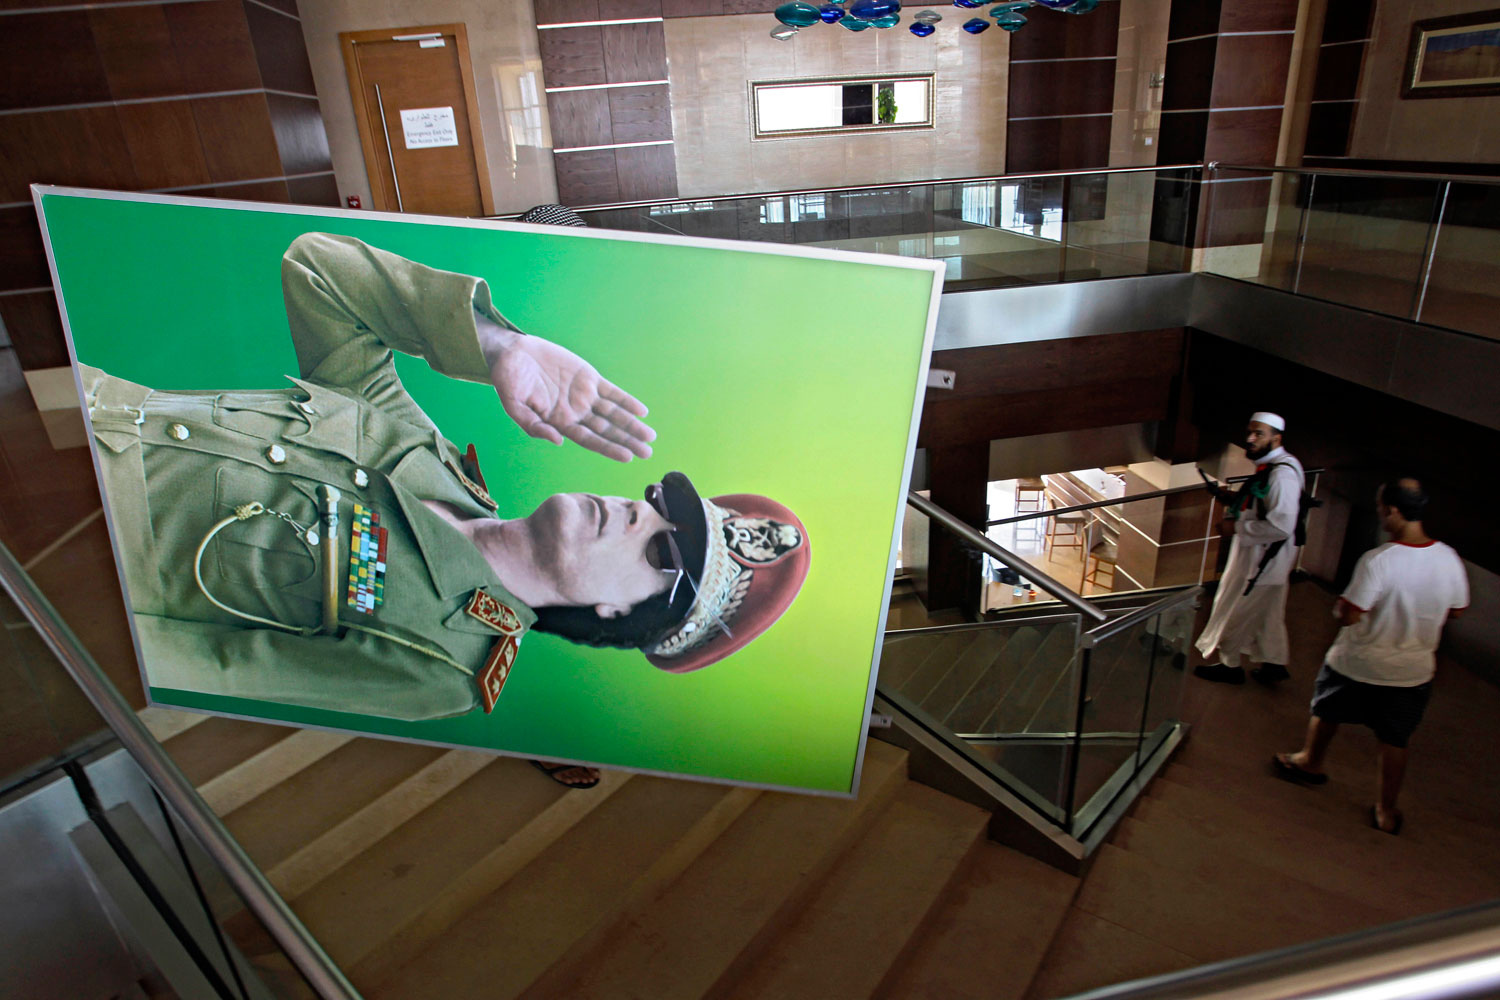 August 23, 2011. People carry a portrait of Moammar Gadhafi inside a hotel in Tripoli, Libya. Libyan rebels stormed Moammar Gadhafi's main military compound in Tripoli Tuesday after fierce fighting with forces loyal to his regime that rocked the capital as the longtime leader refused to surrender despite the stunning advances by opposition forces.